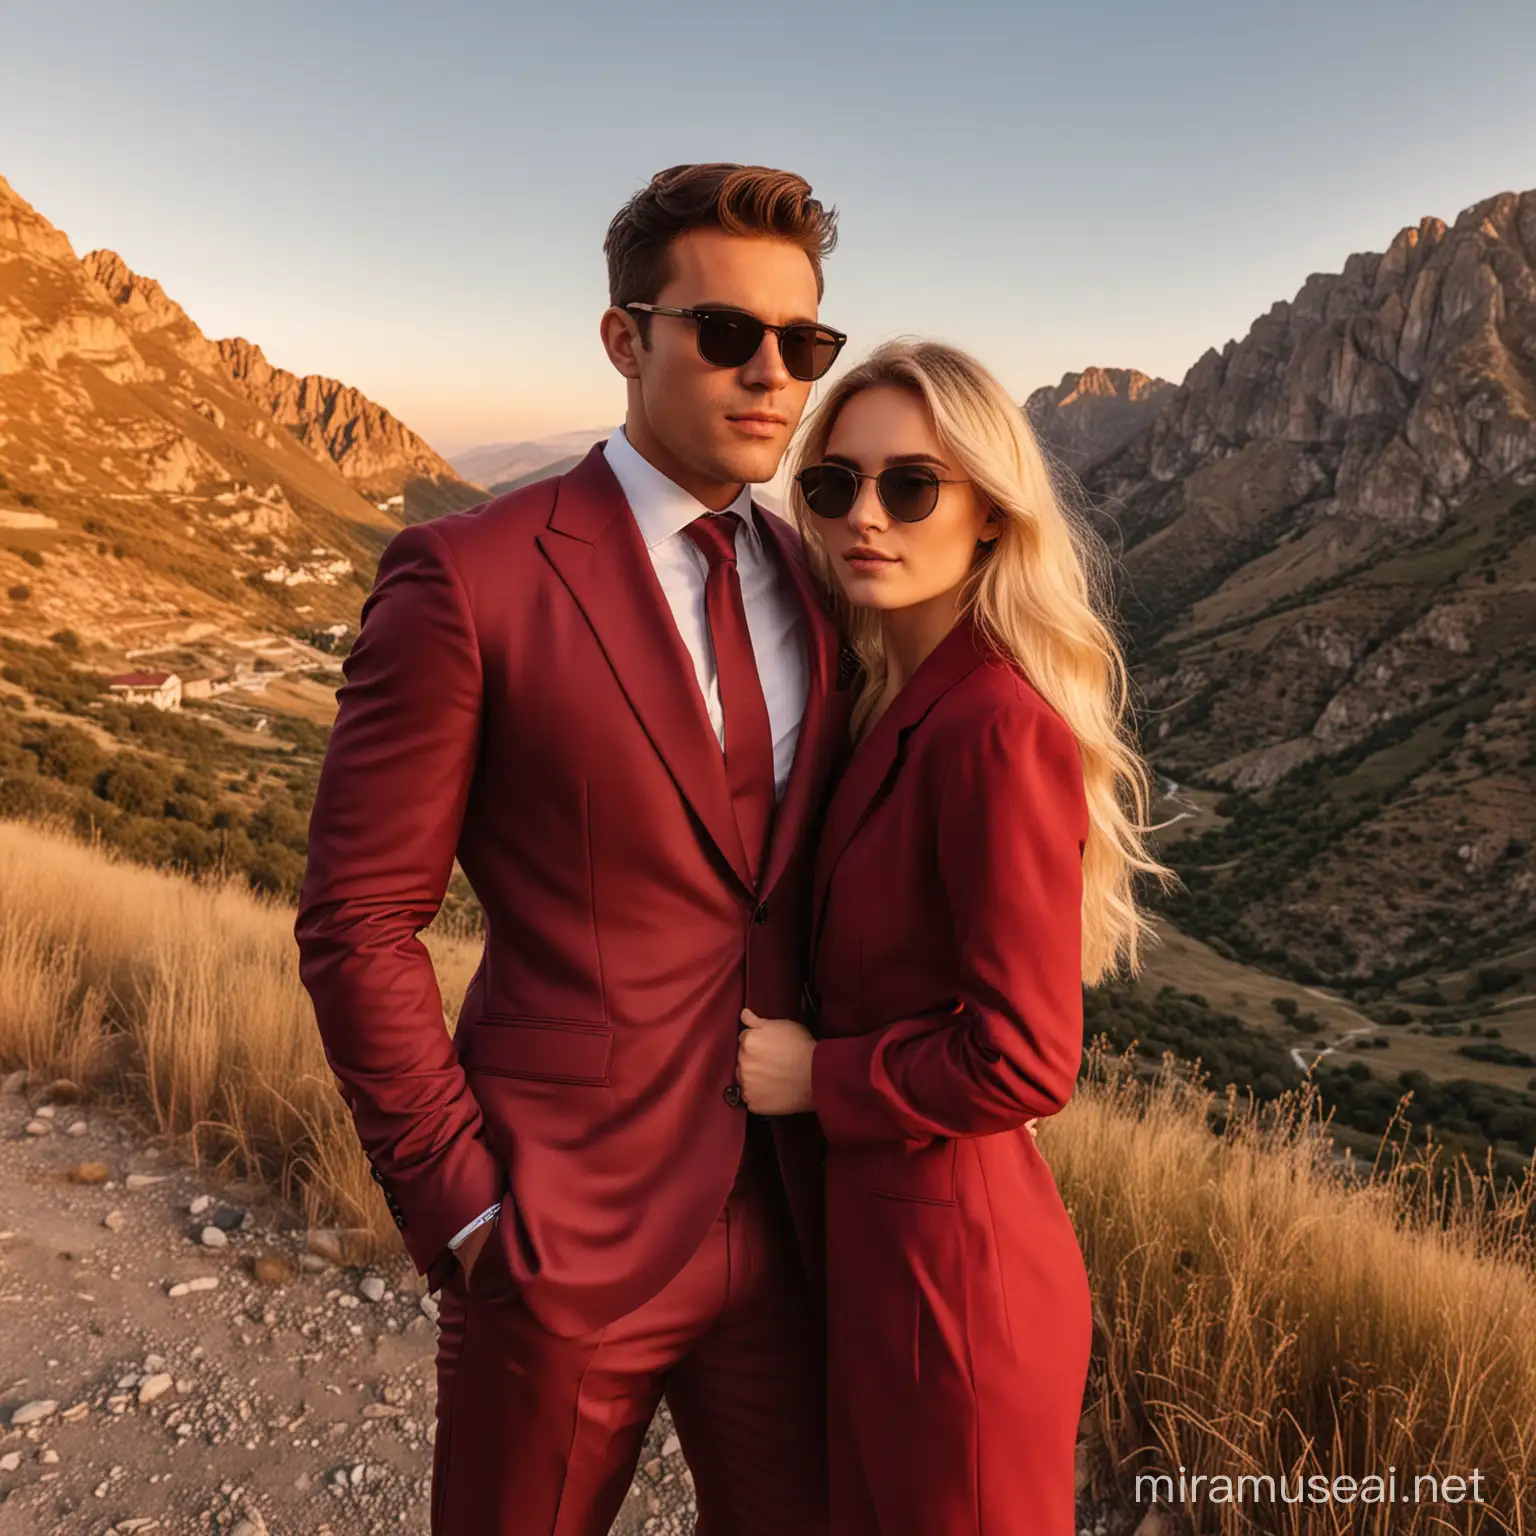 Elegant Couple in Burgundy Suit and Blonde Hairstyle at Mountain Sunset